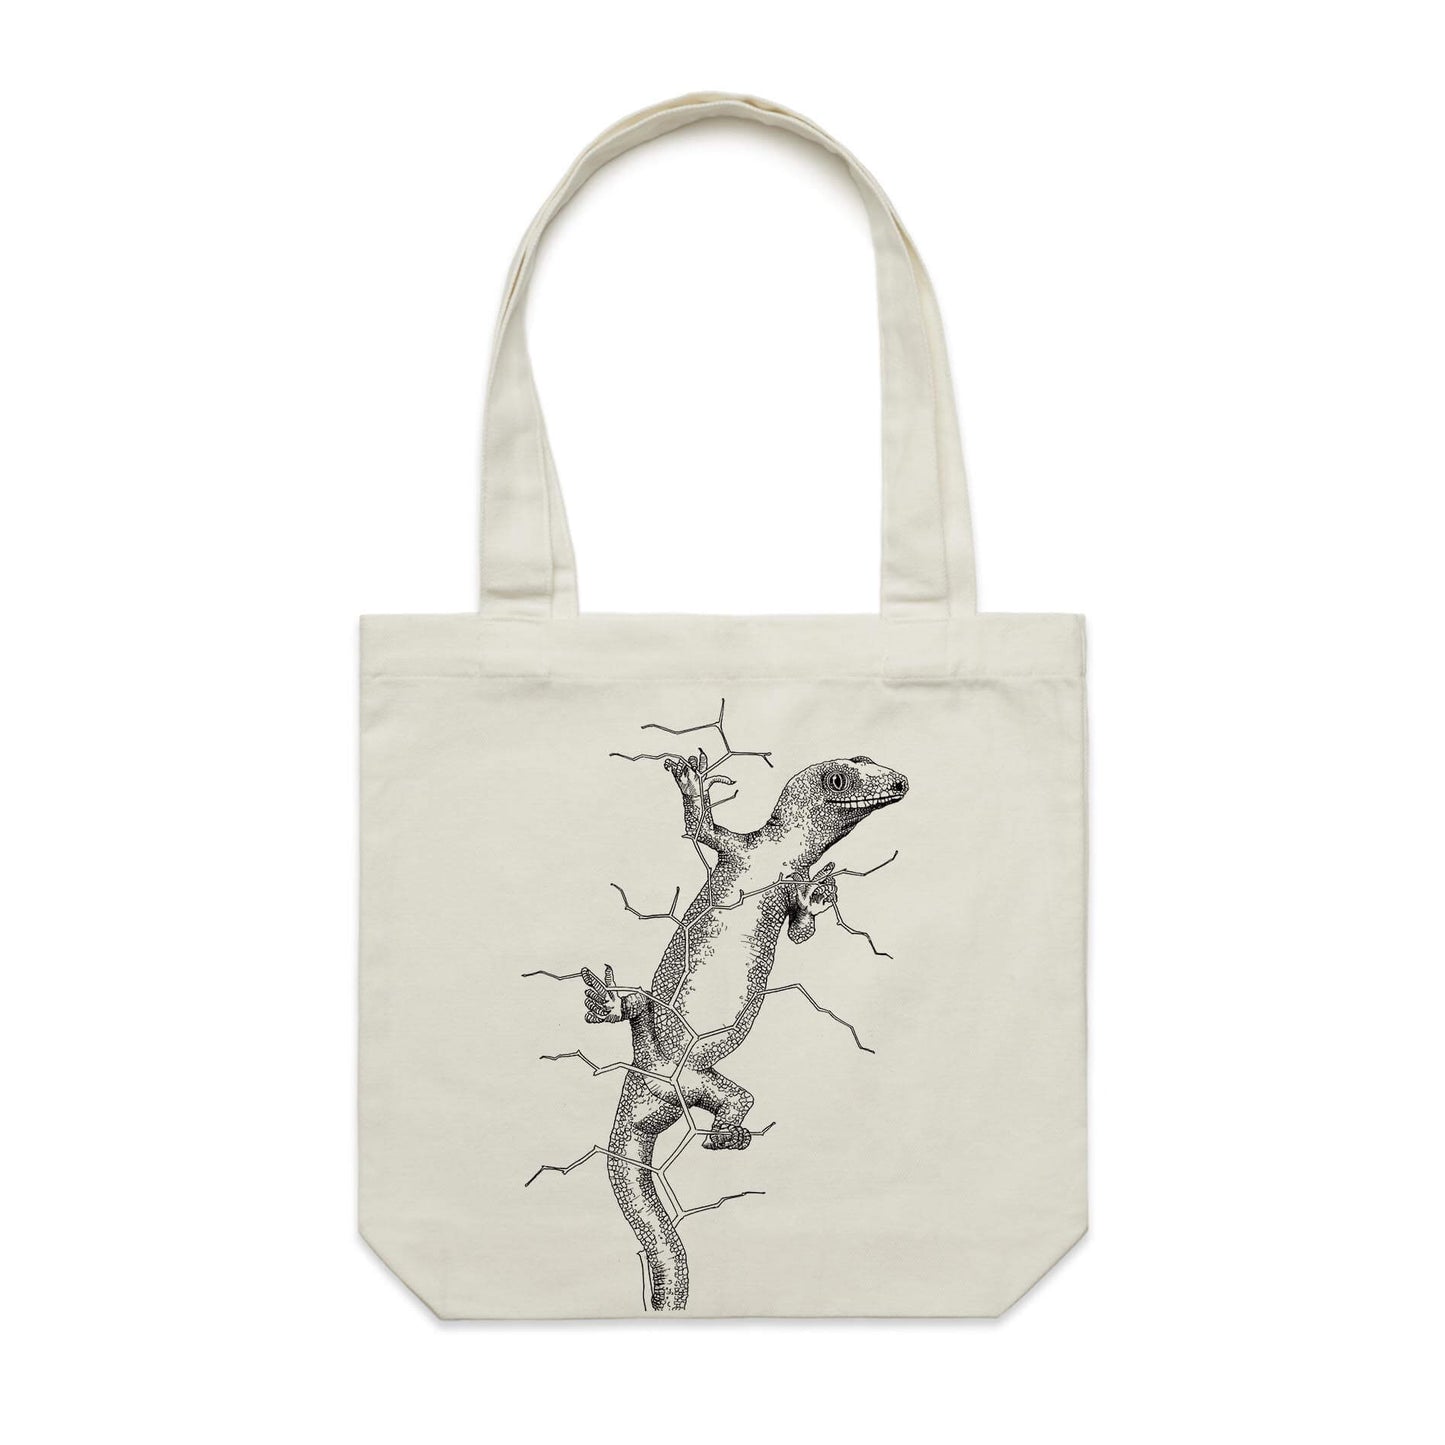 Cotton canvas tote bag with a screen printed Gecko design.